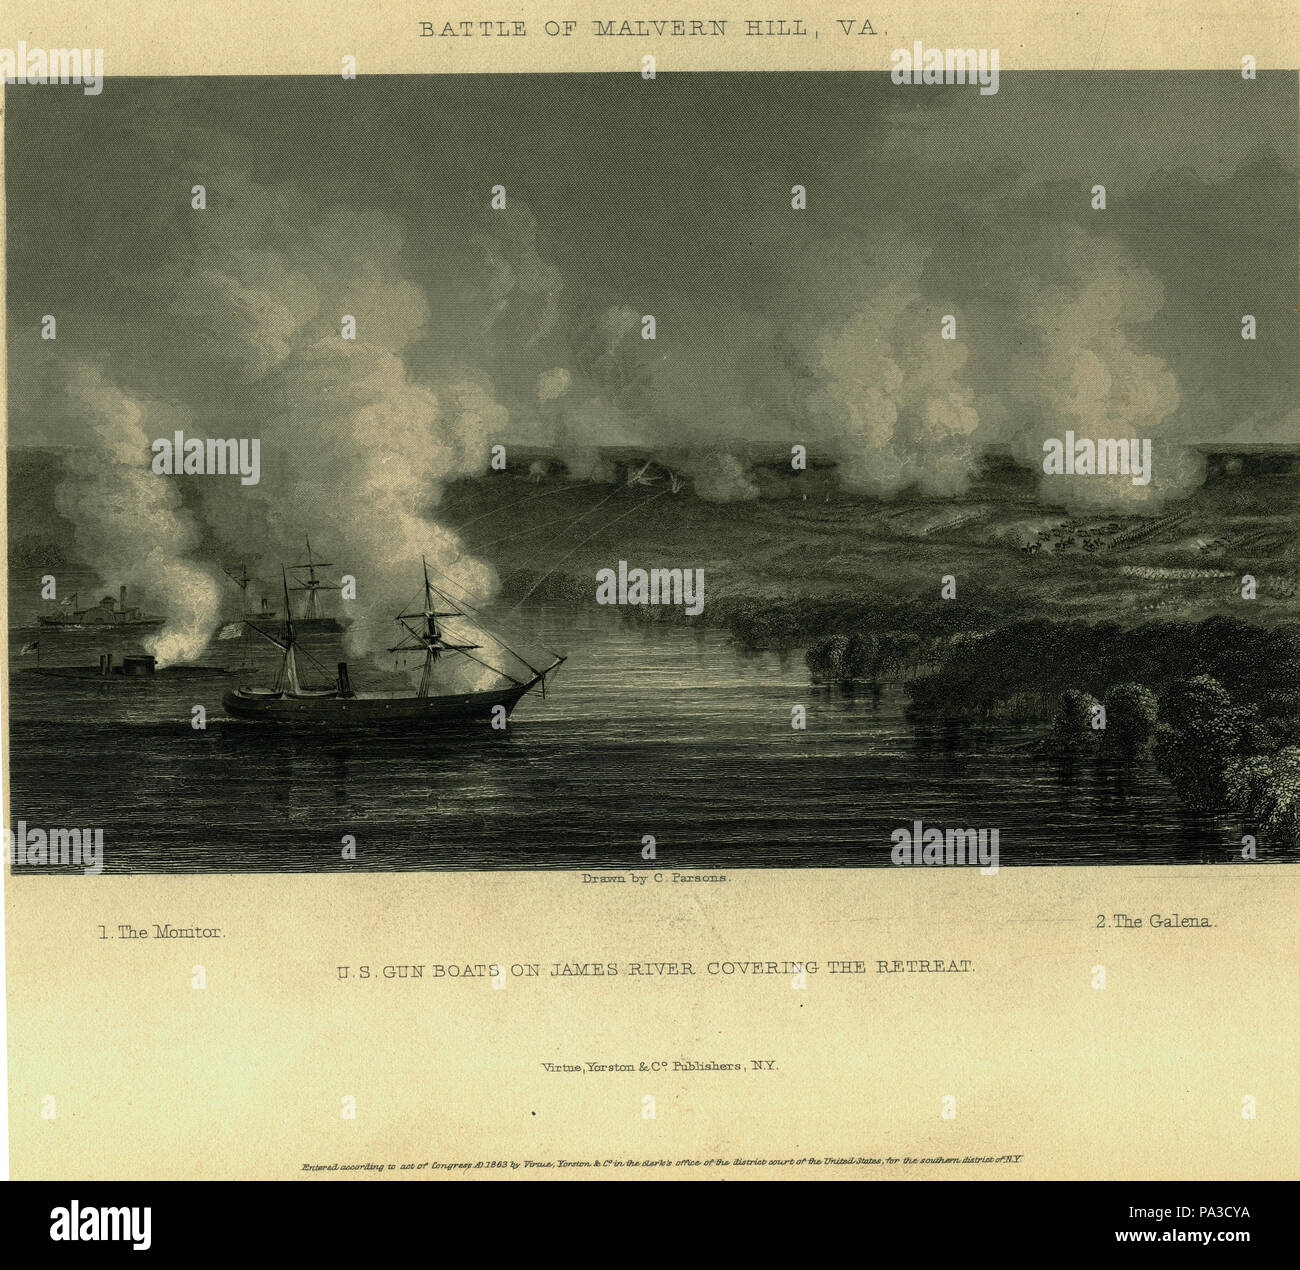 Probably after Louis Maurer, The Gun Boat Candidate, At the Battle of  Malvern Hill